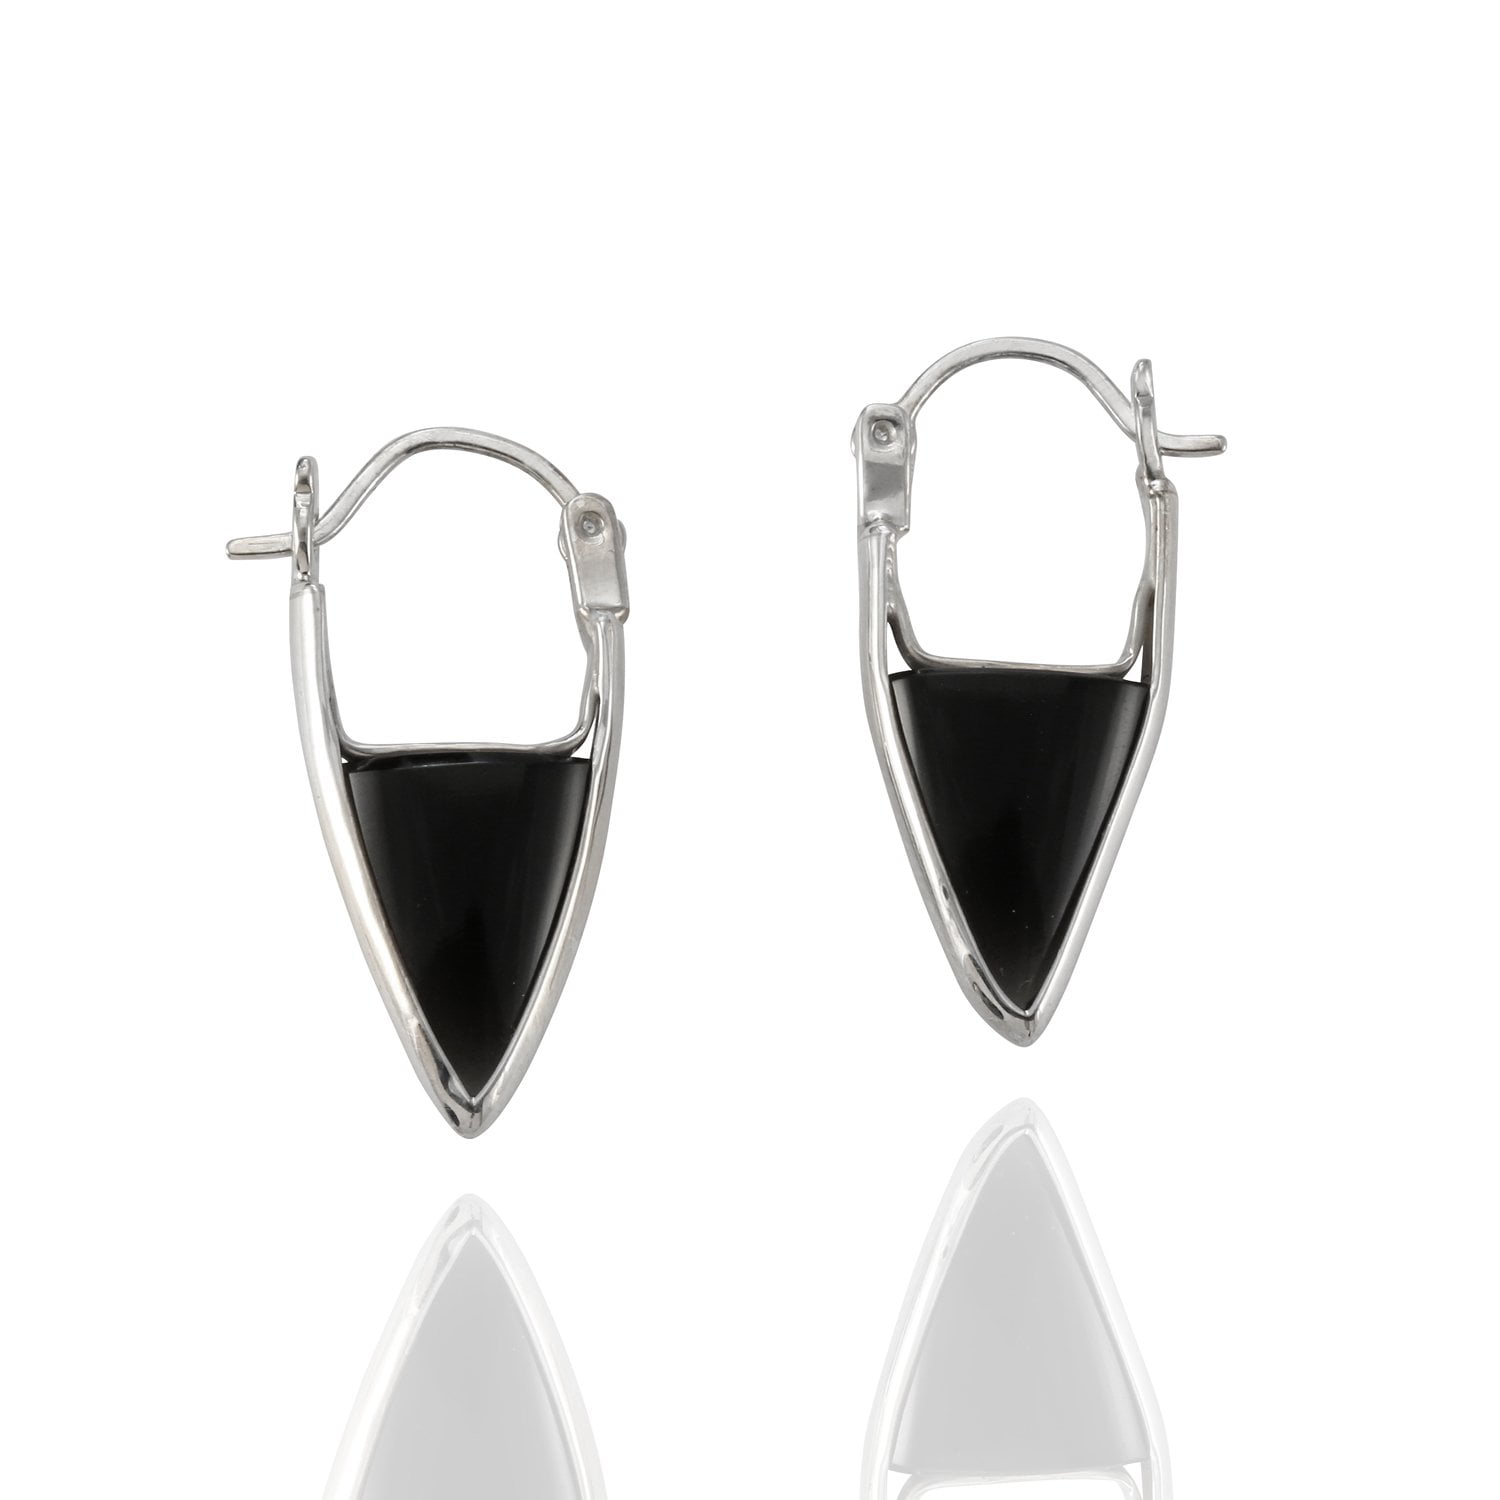 Black Onyx 925 Sterling Silver Hoops Posts Earrings Made in Taxco Mexico 